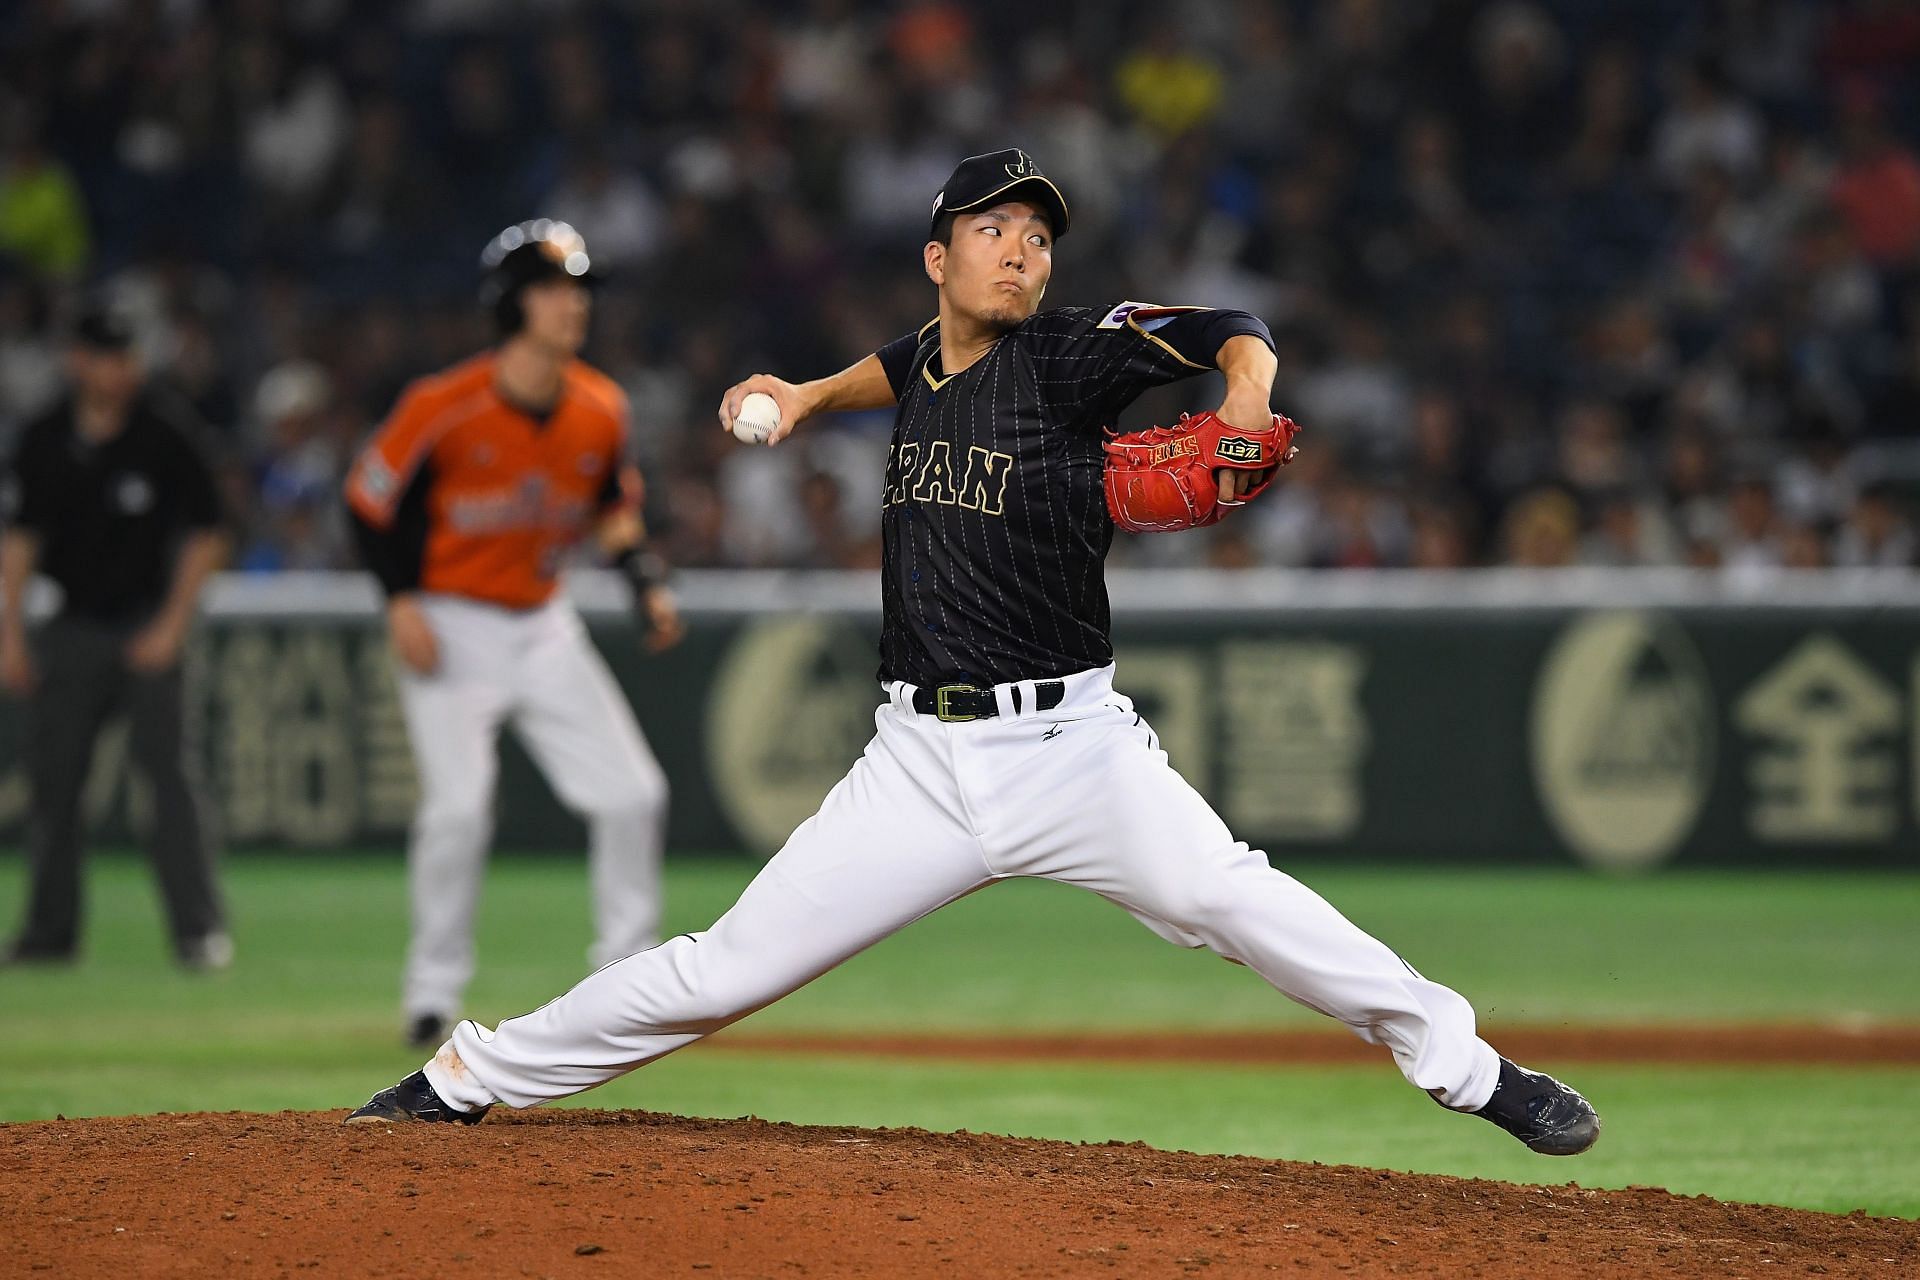 Pitcher Kohdai Senga throws during the international friendly match between Netherlands and Japan at the Tokyo Dome